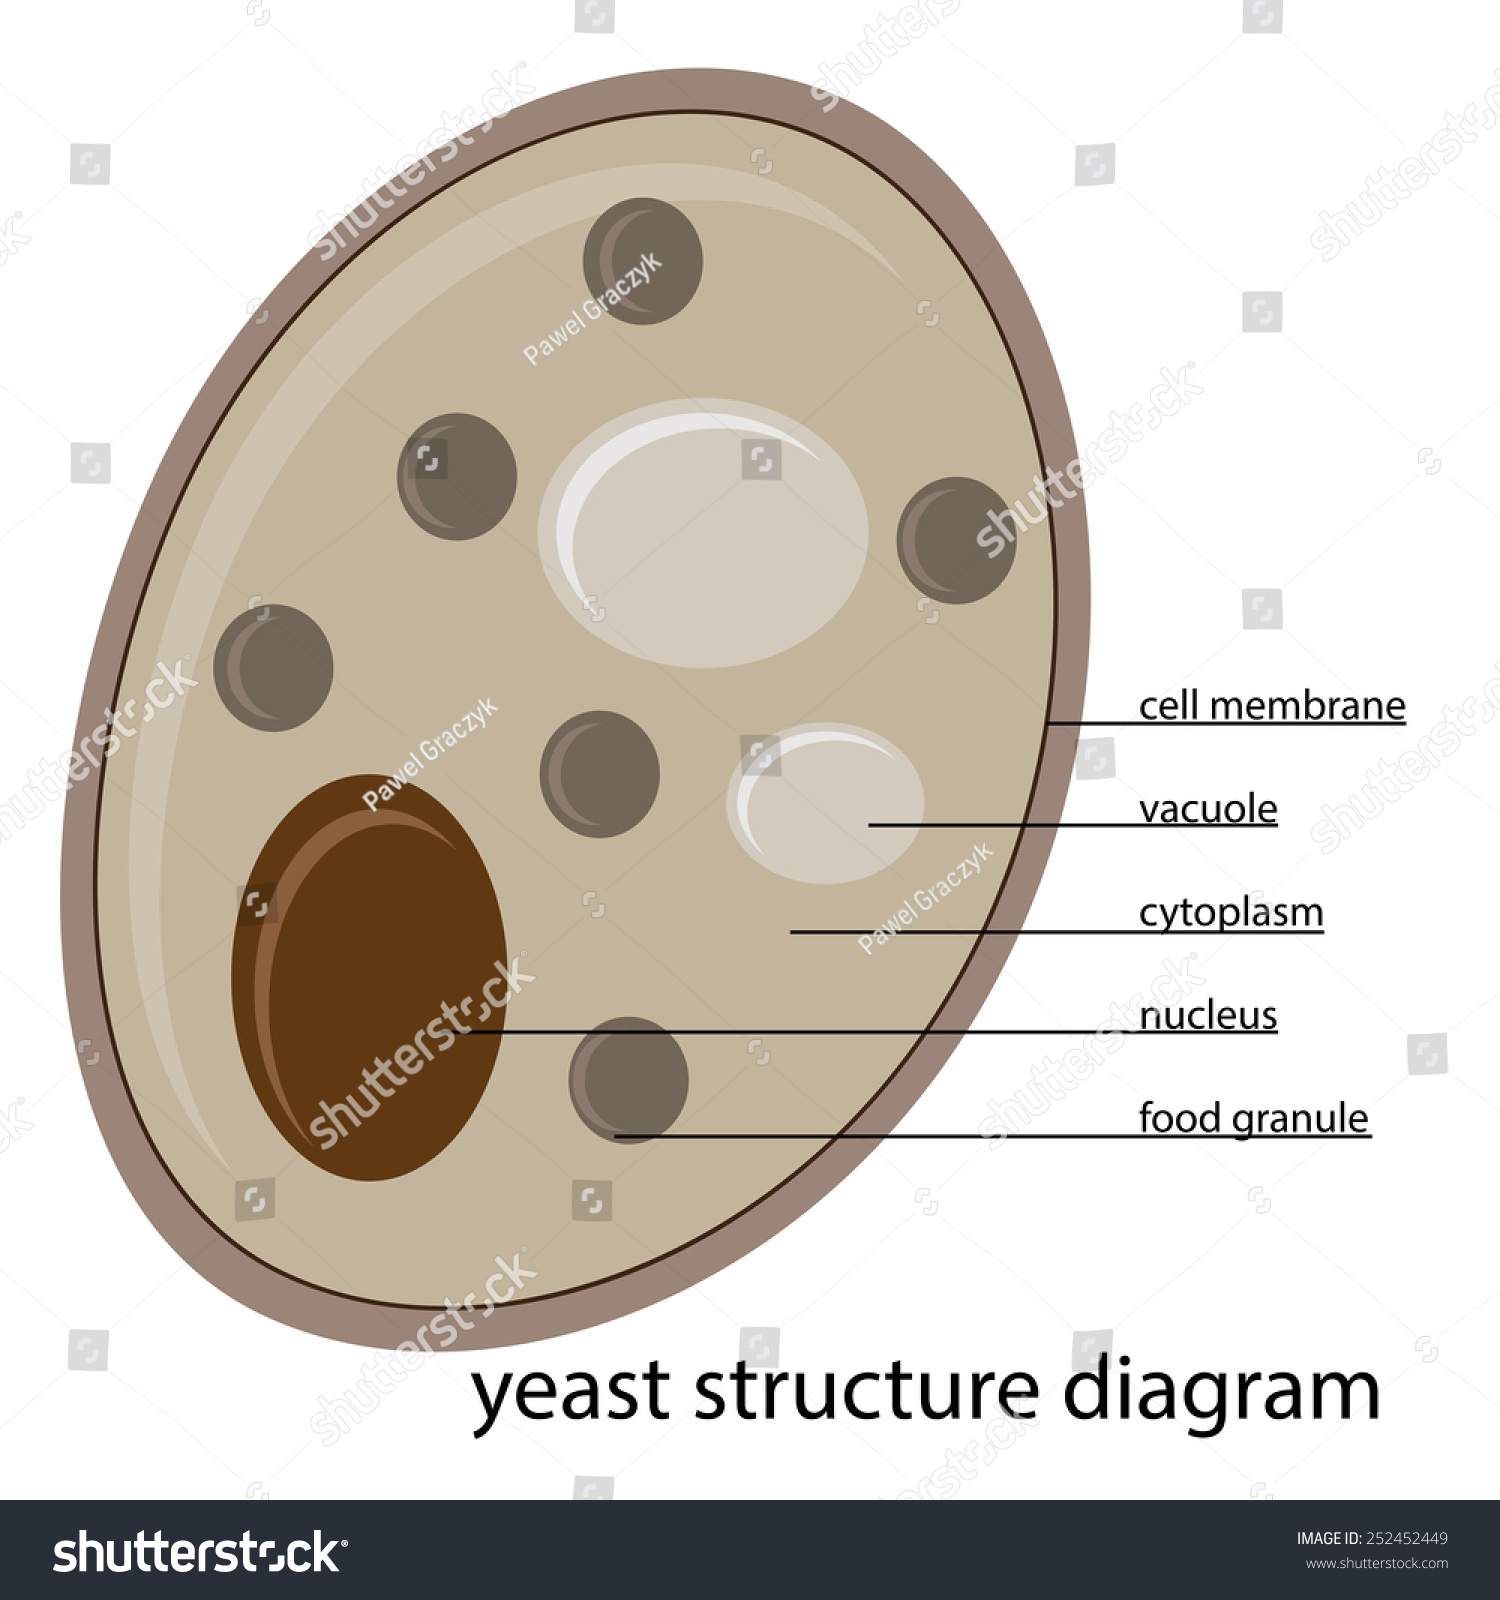 Yeast Labelled Diagram 